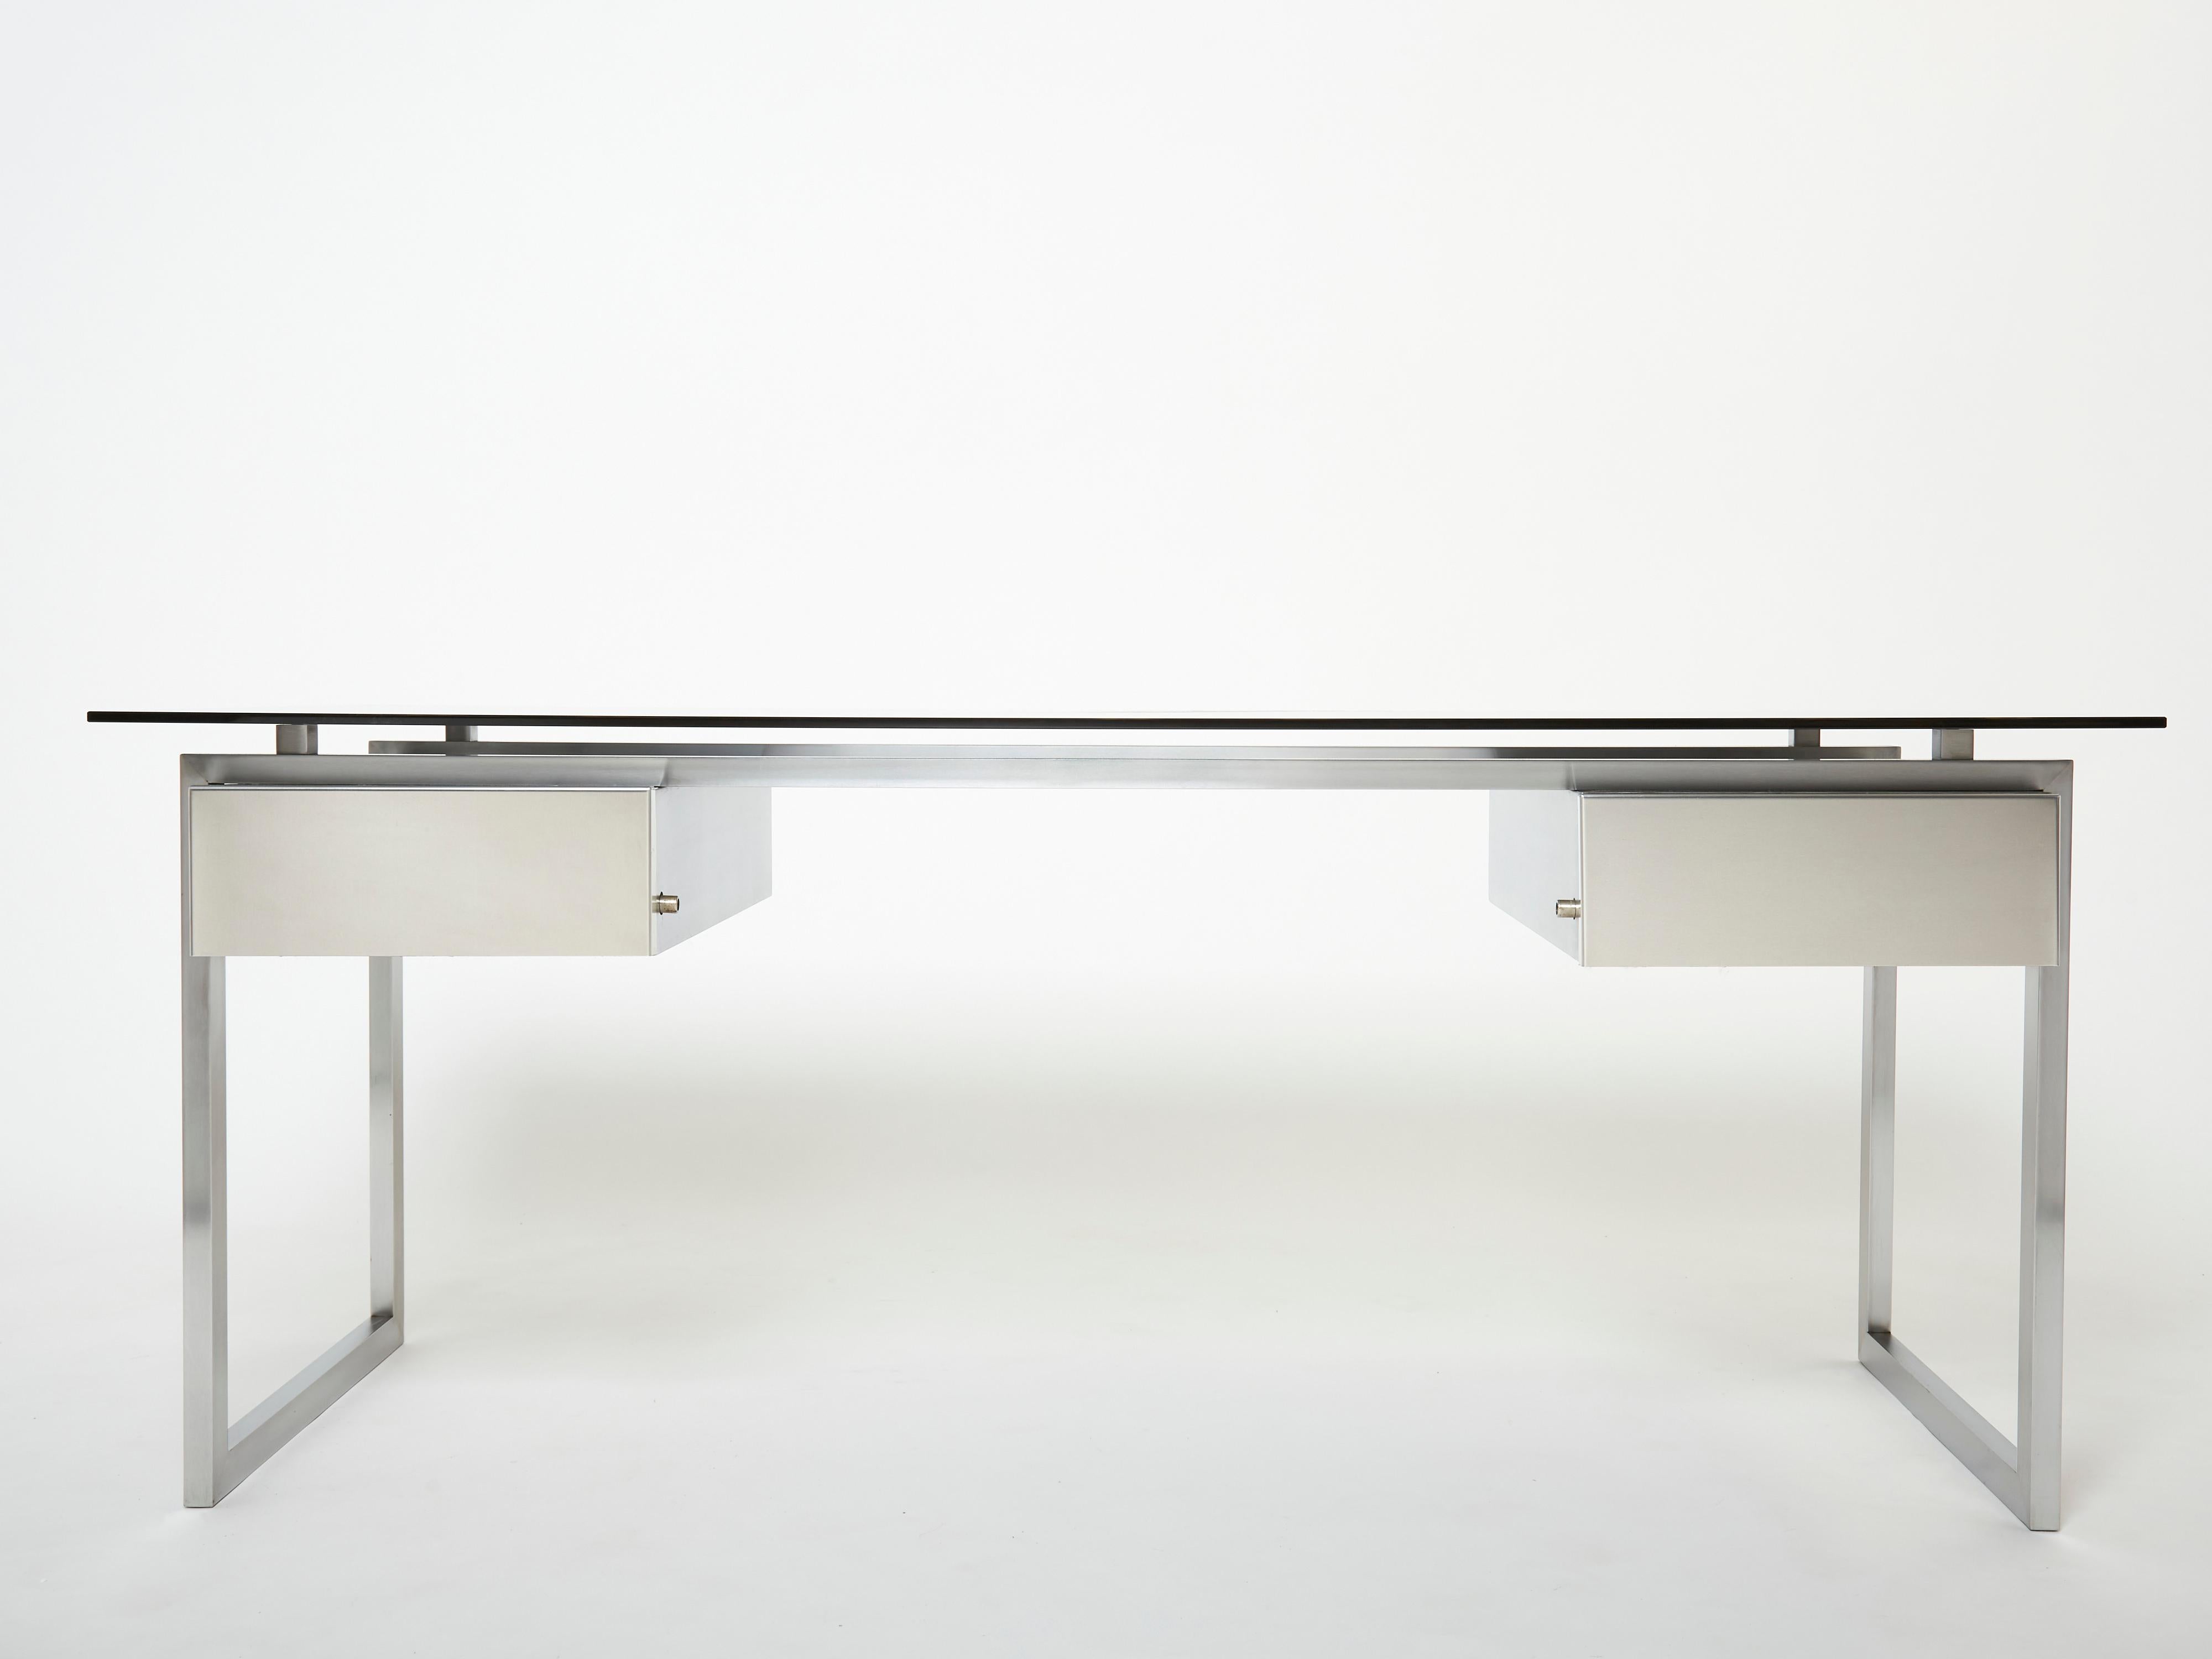 A rare brushed stainless steel desk table designed by French designer Patrice Maffei for Kappa editor in the 1970s, it features two locking drawers and a grey smoked glass top. Following the 1970s stainless steel trend, led by Maria Pergay, this